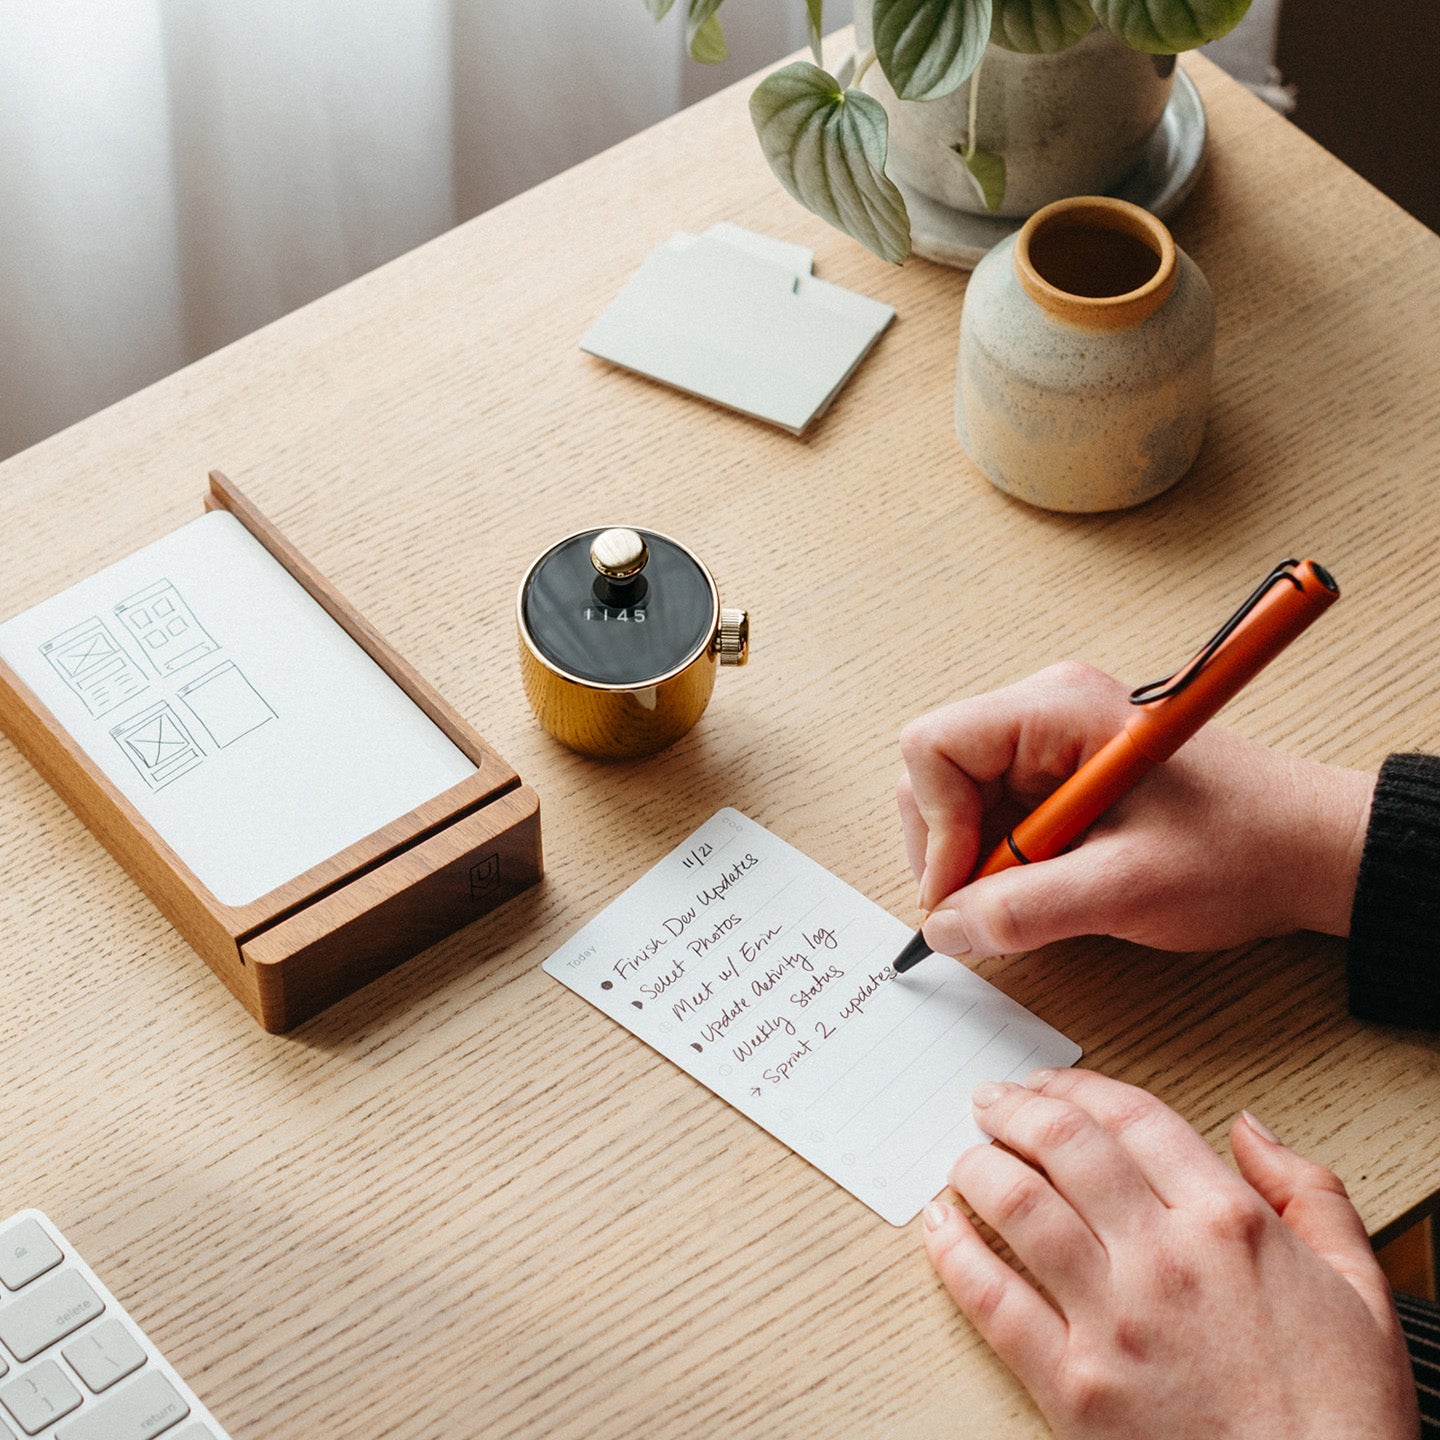 Nudge Counter and Ugmonk Analog for Productivity